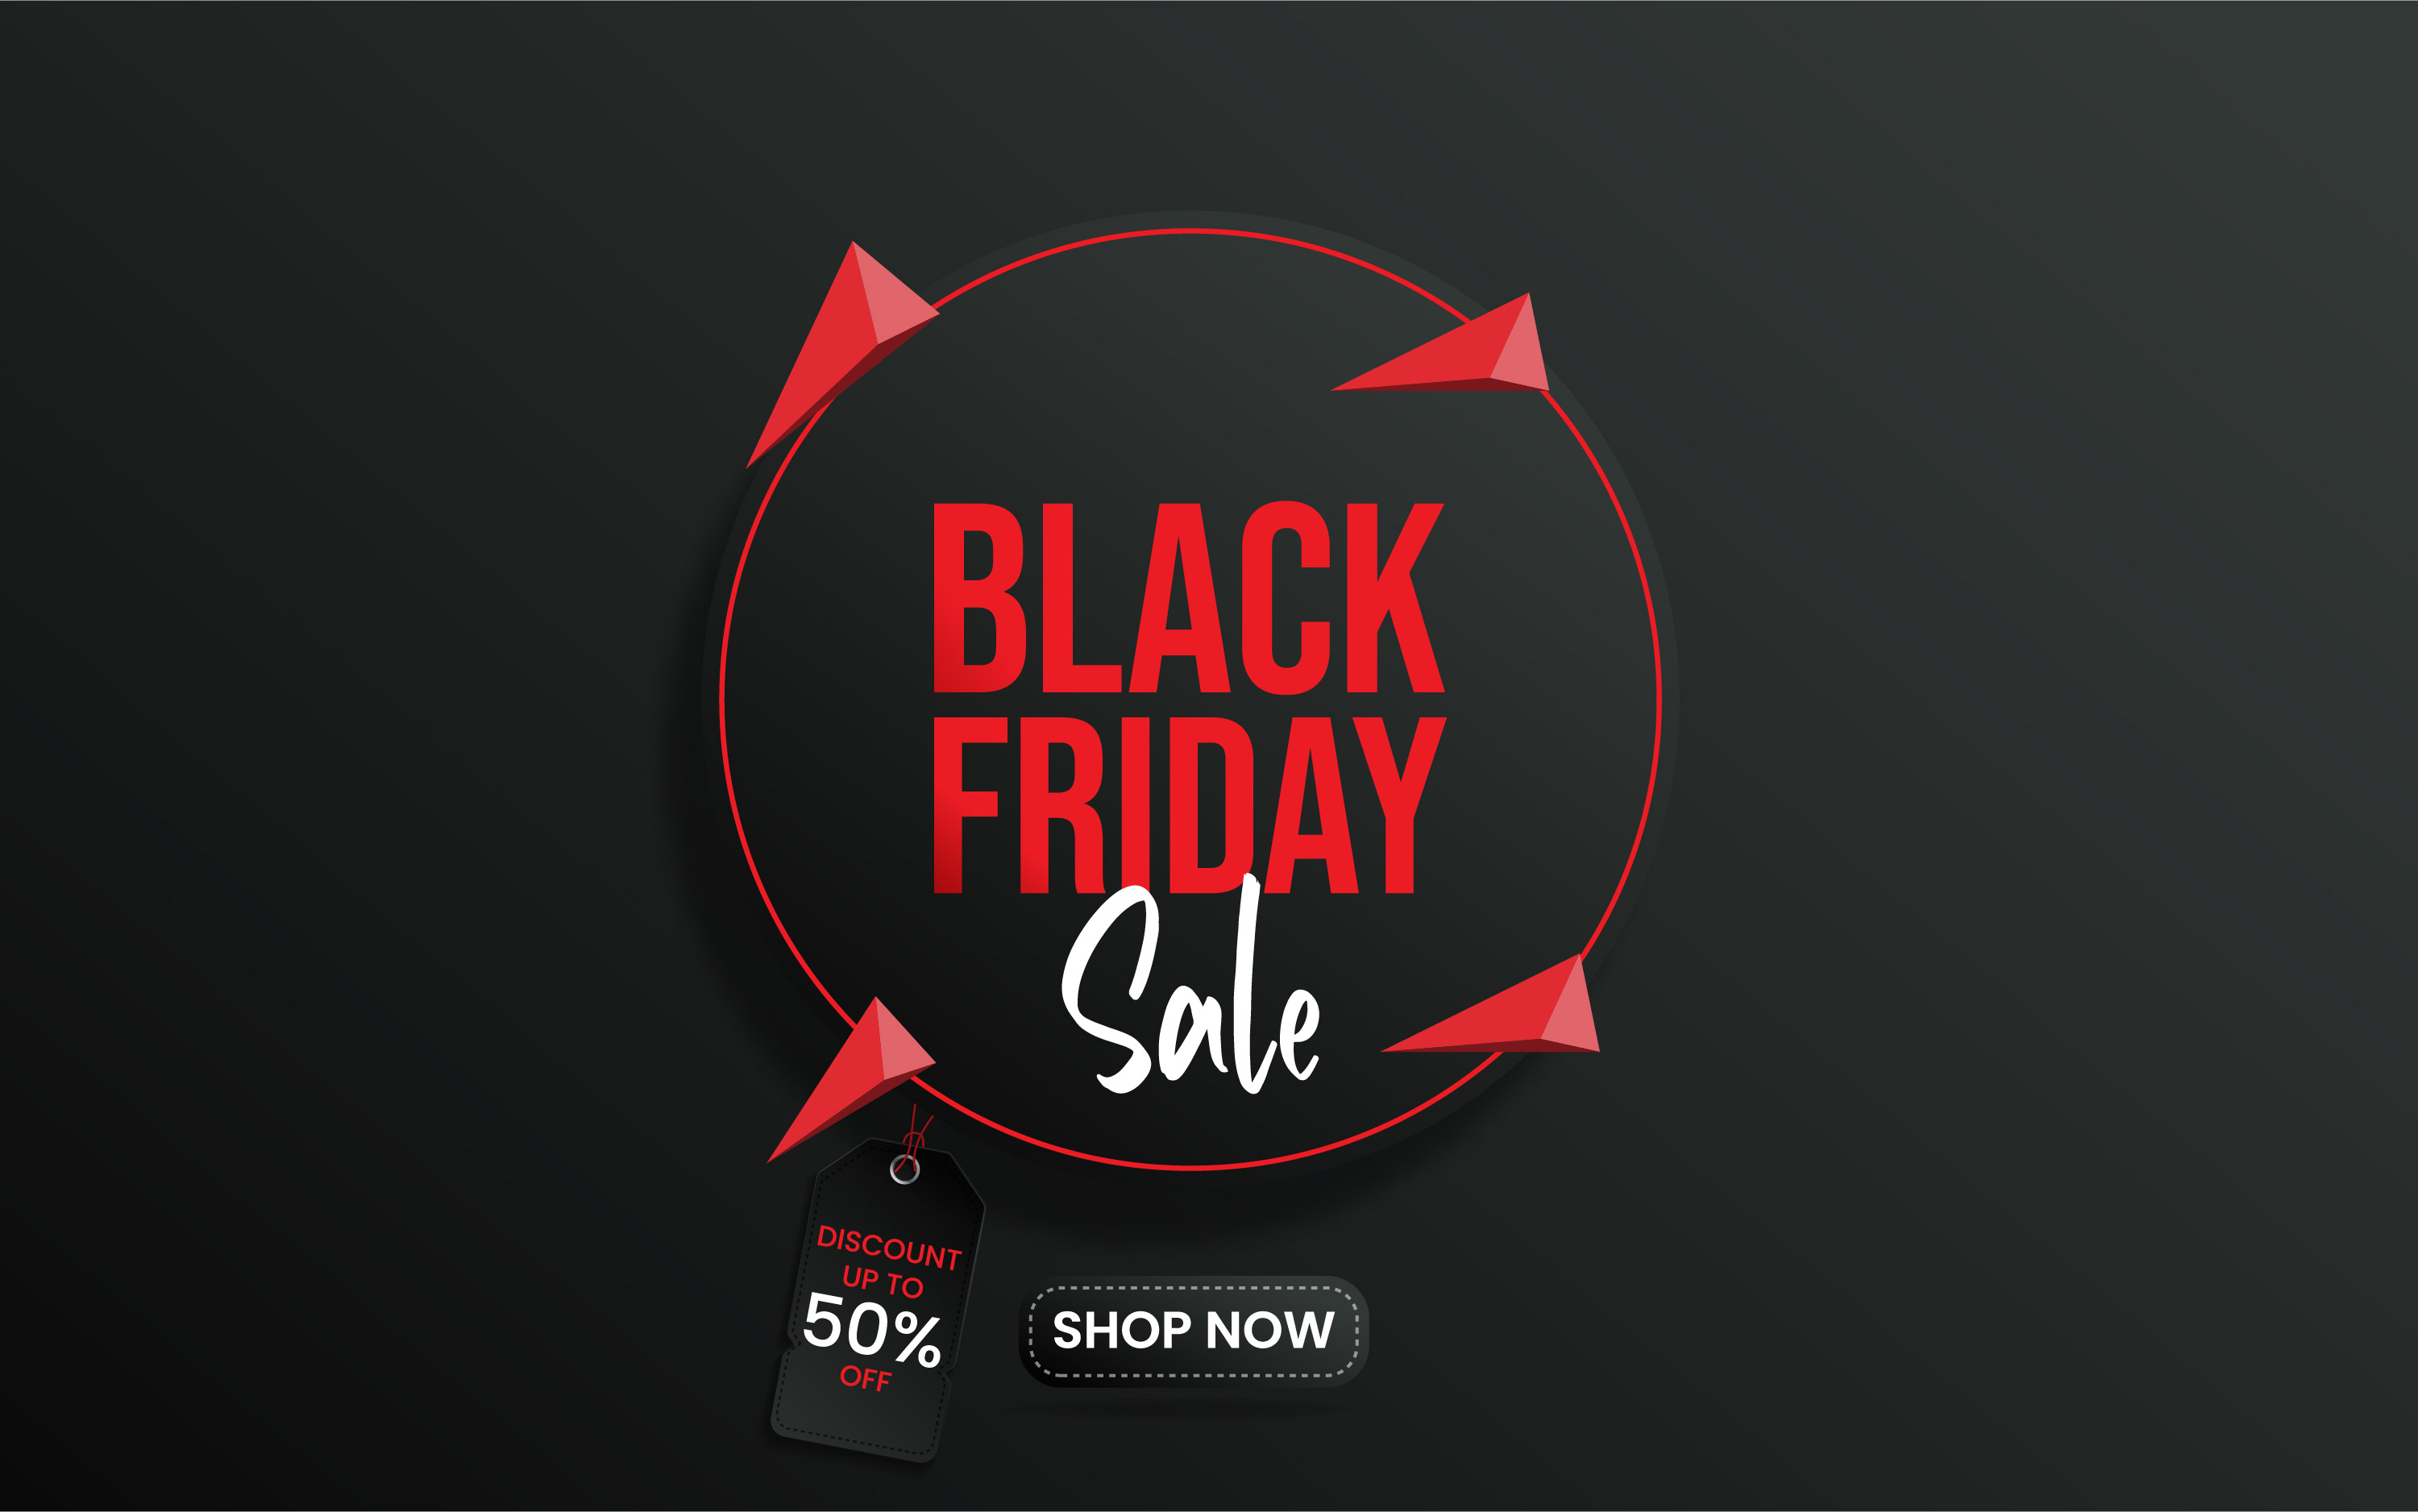 Download Black Friday Sale Banner Template Design Graphic By Ngabeivector Creative Fabrica SVG Cut Files